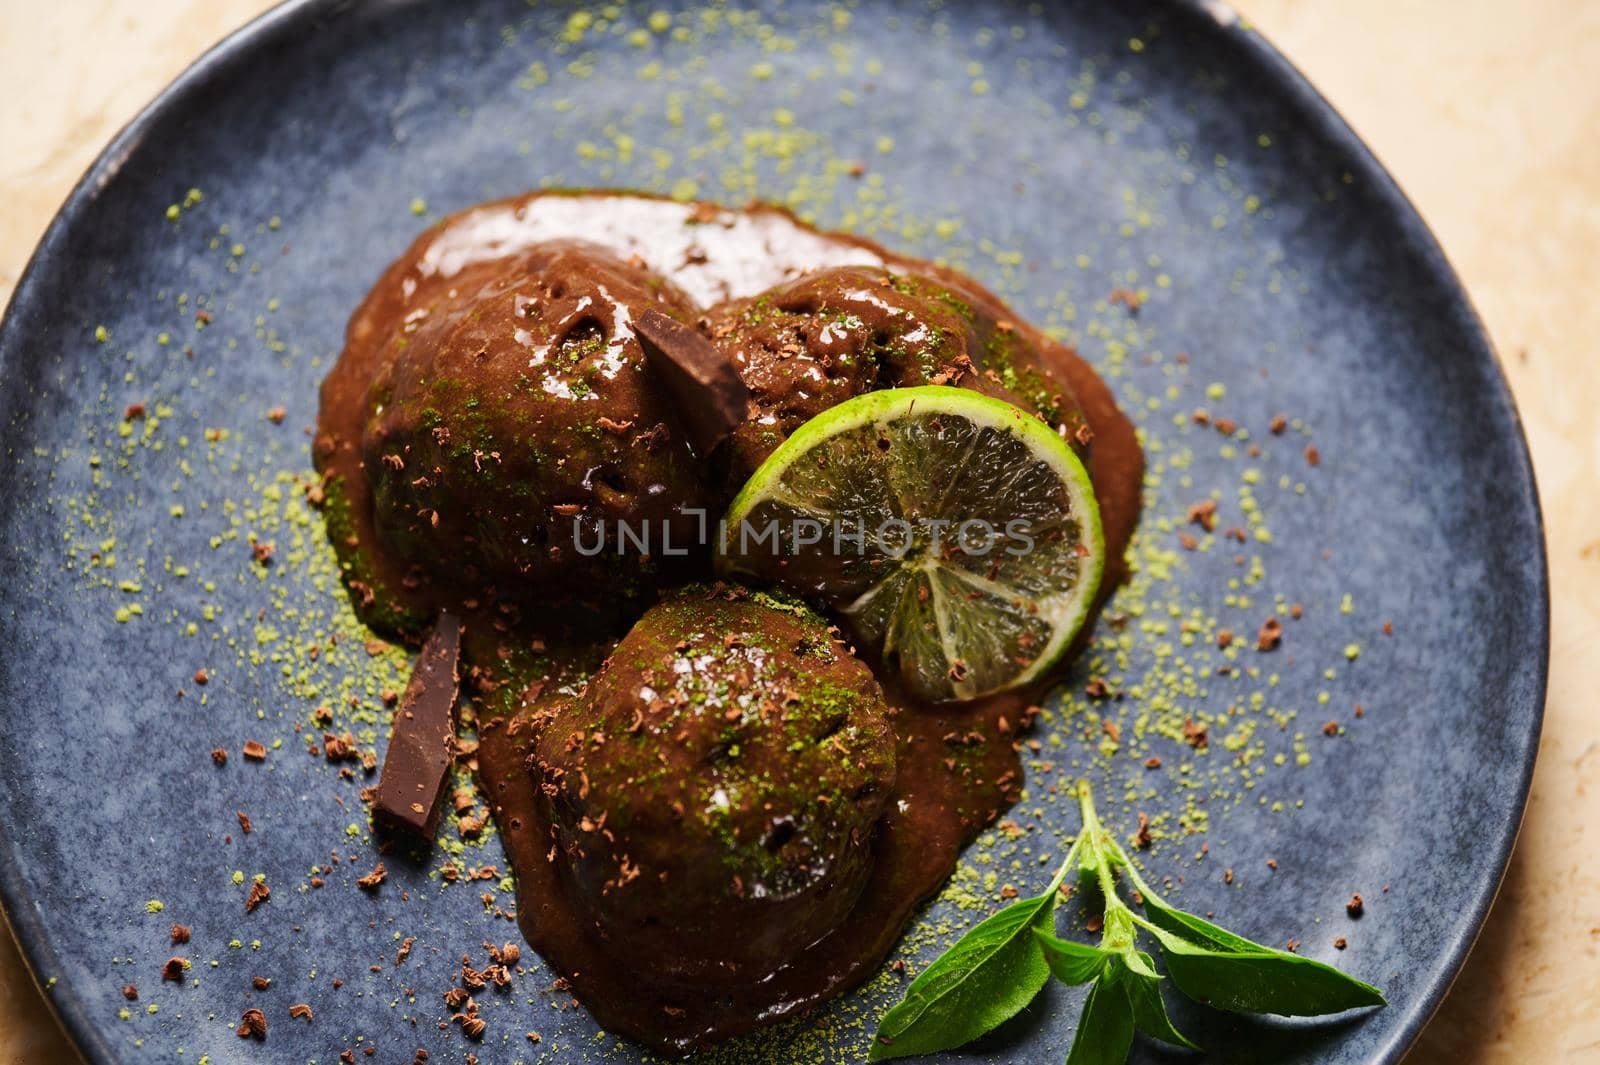 Flat lay. Food still life. Raw vegan chocolate ice cream sorbet balls, garnished with sprinkled green matcha powder, slice of juicy lime and lemon basil leaves on dark blue plate, on marble background